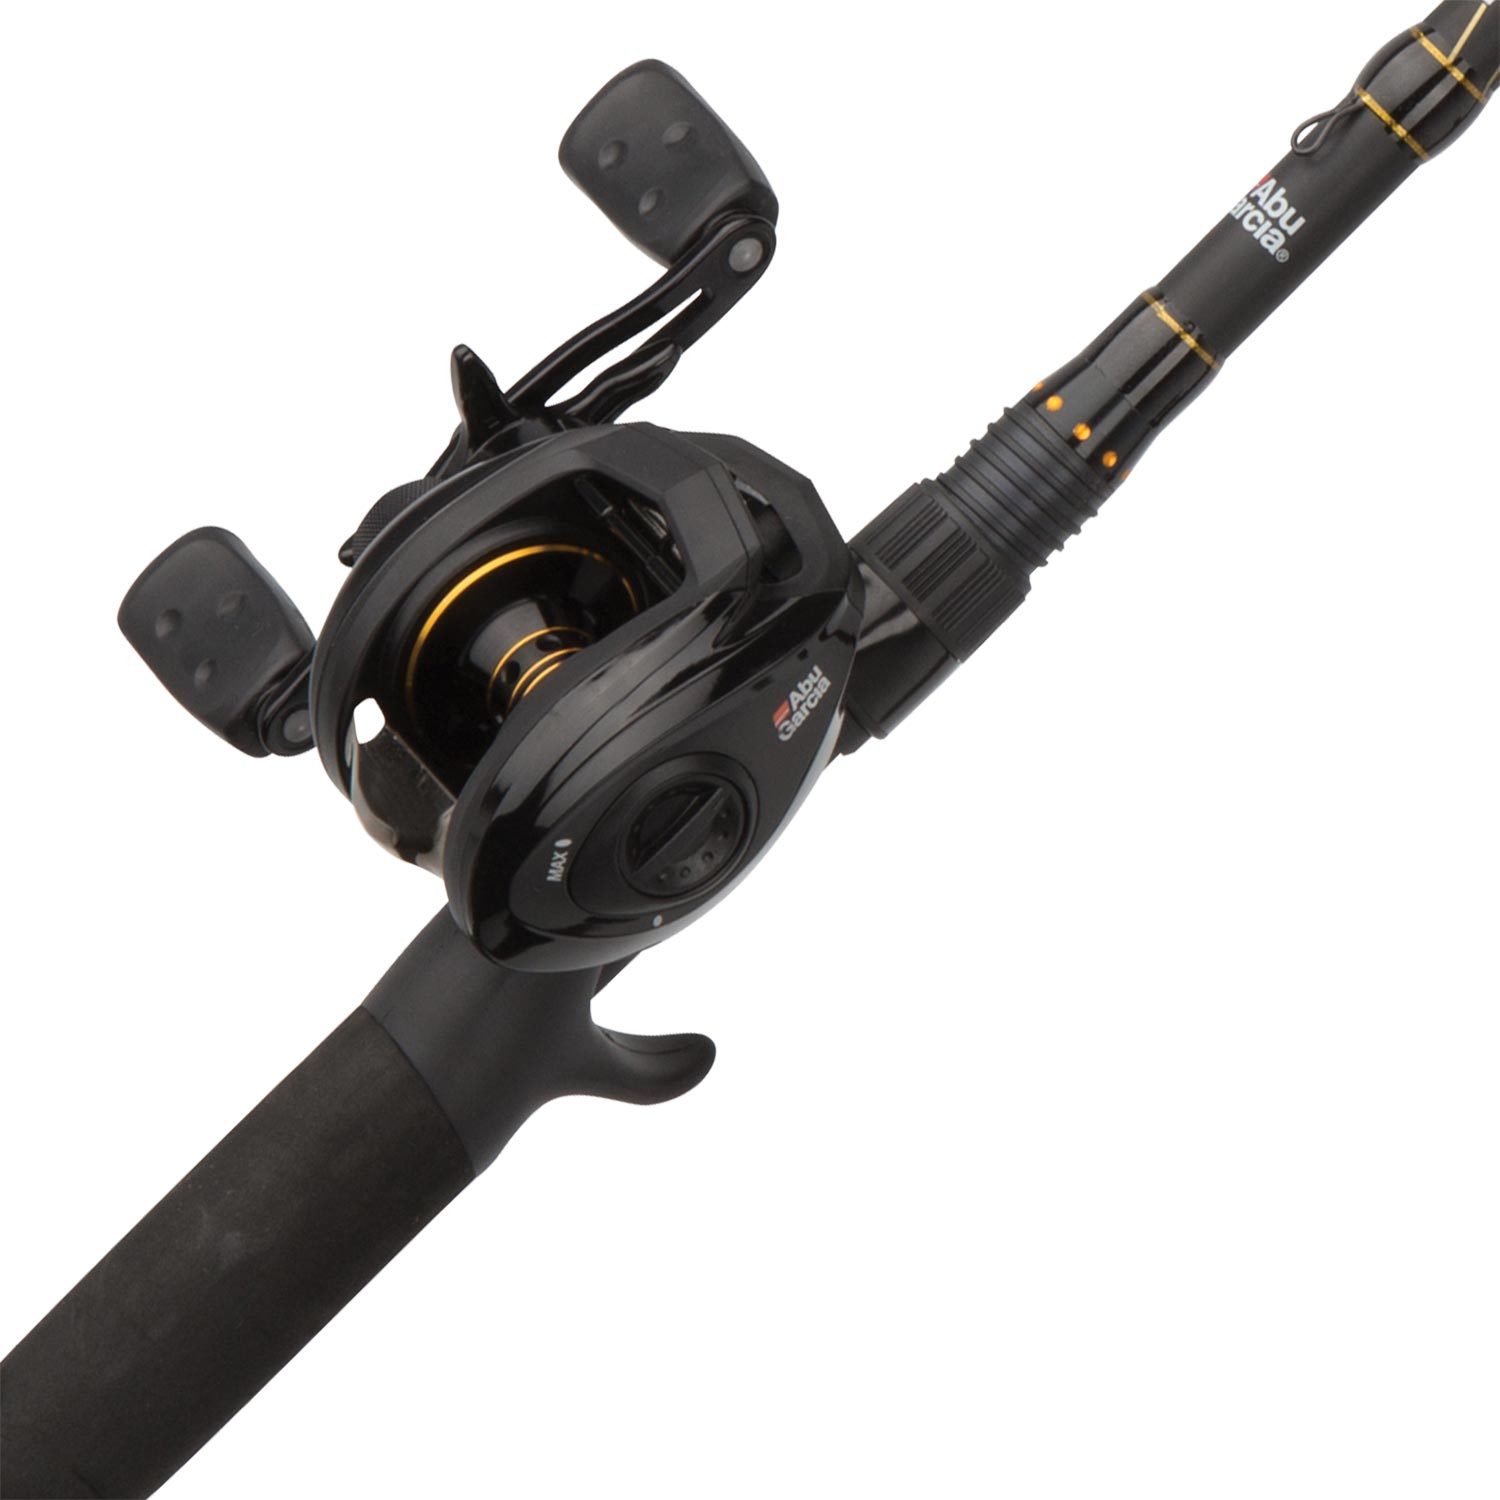 baitcast reel left hand, baitcast reel left hand Suppliers and